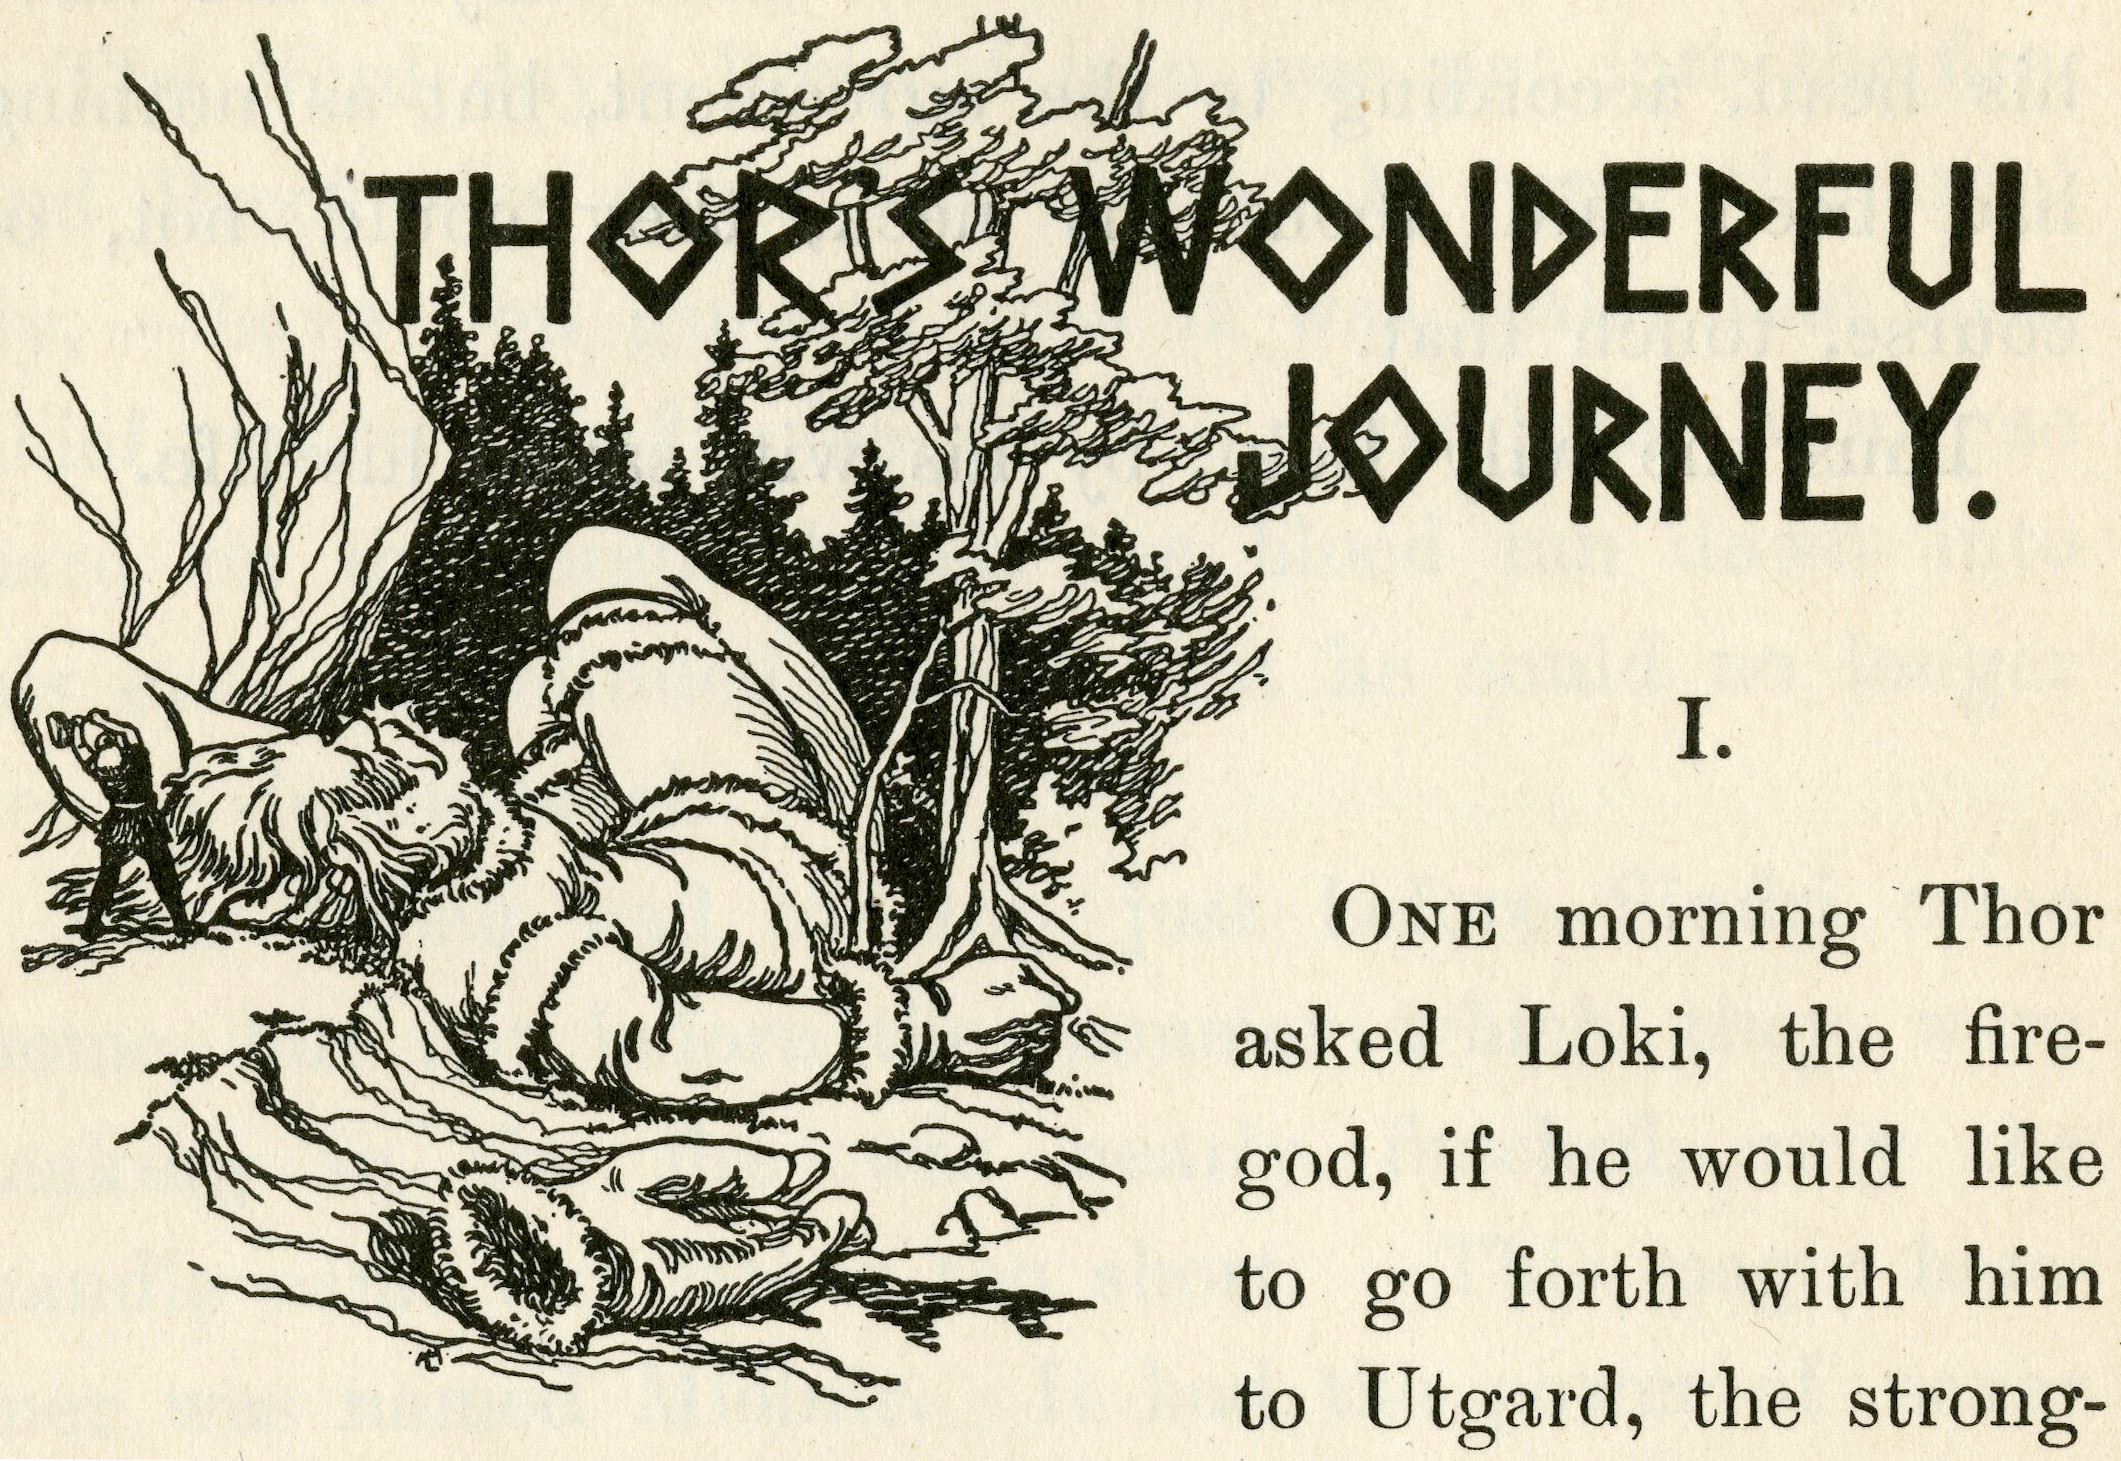 Illustrated Title Header for "Thor's Wonderful
                                Journey